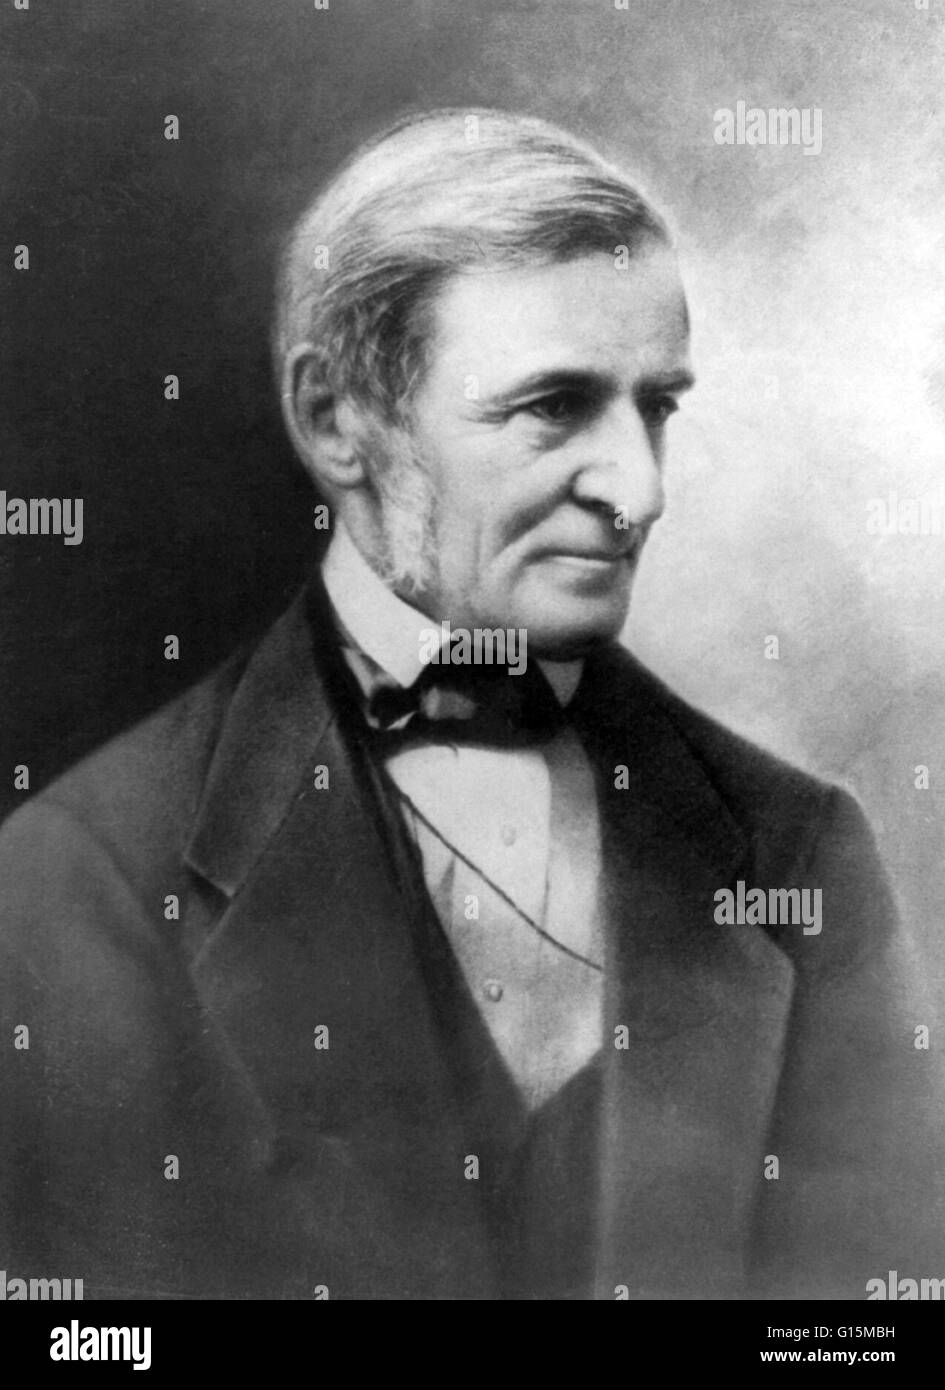 Ralph Waldo Emerson (May 25, 1803 - April 27, 1882) was an American essayist, lecturer, and poet, who led the Transcendentalist movement of the mid-19th century. He was a champion of individualism who disseminated his thoughts through dozens of published Stock Photo